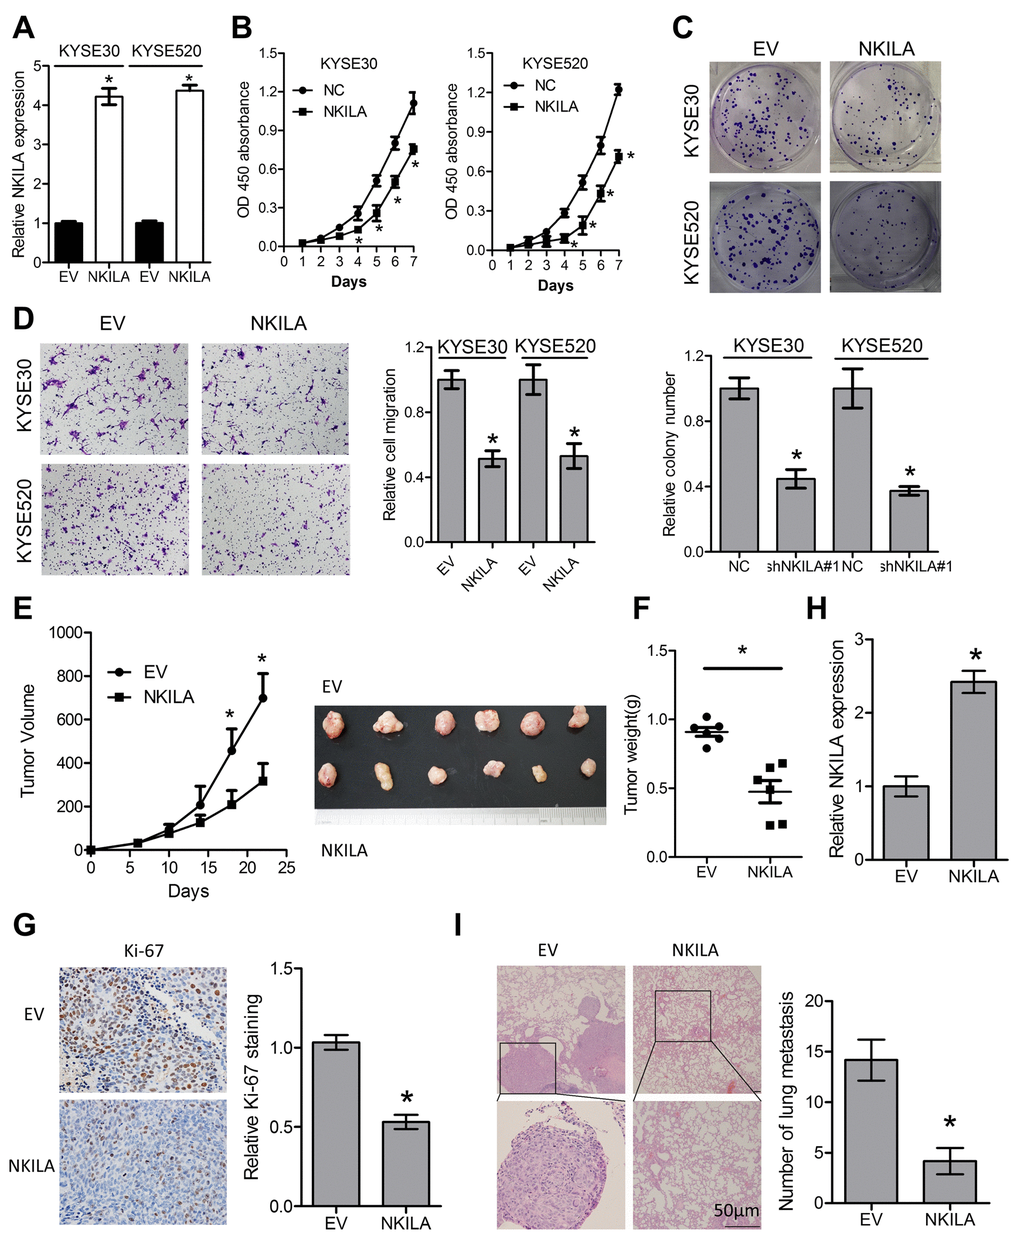 Enforced NKILA expression inhibits proliferation and metastasis in ESCC cells. (A) Overexpression of NKILA in KYSE30 and KYSE520 cells was confirmed by qPCR assays. (B) CCK-8 assays of KYSE30 and KYSE520 cells after overexpression of NKILA. (C) Colony formation assays of KYSE30 and KYSE520 cells after overexpression of NKILA. Upper panel was representative images and lower panel was statistical quantification. (D) Migration assays of KYSE30 and KYSE520 cells after overexpression of NKILA. Left panel was representative images and right panel was statistical quantification. (E) Tumor growth curve of KYSE30/EV and KYSE30/NKILA cells. The dissected tumors from the nude mice was photographed. (F) Weight of dissected tumors was recorded. (G) Immunohistochemical analysis of Ki-67 in the dissected tumors. Left panel was representative images and right panel was statistical quantification. (H) Expression level of NKILA in the dissected tumors was detected by qPCR. (I) Representative H&E staining of lung tissue sections formed by KYSE30/EV and KYSE30/NKILA cells. Scale bars: 50μm. The micro-metastasis in the lung was numbered. Data in A, B, C and D represents the mean ± SD of three repeated experiments. Data in E, F, G, H and I represents the mean ± SD of six mice. *P 